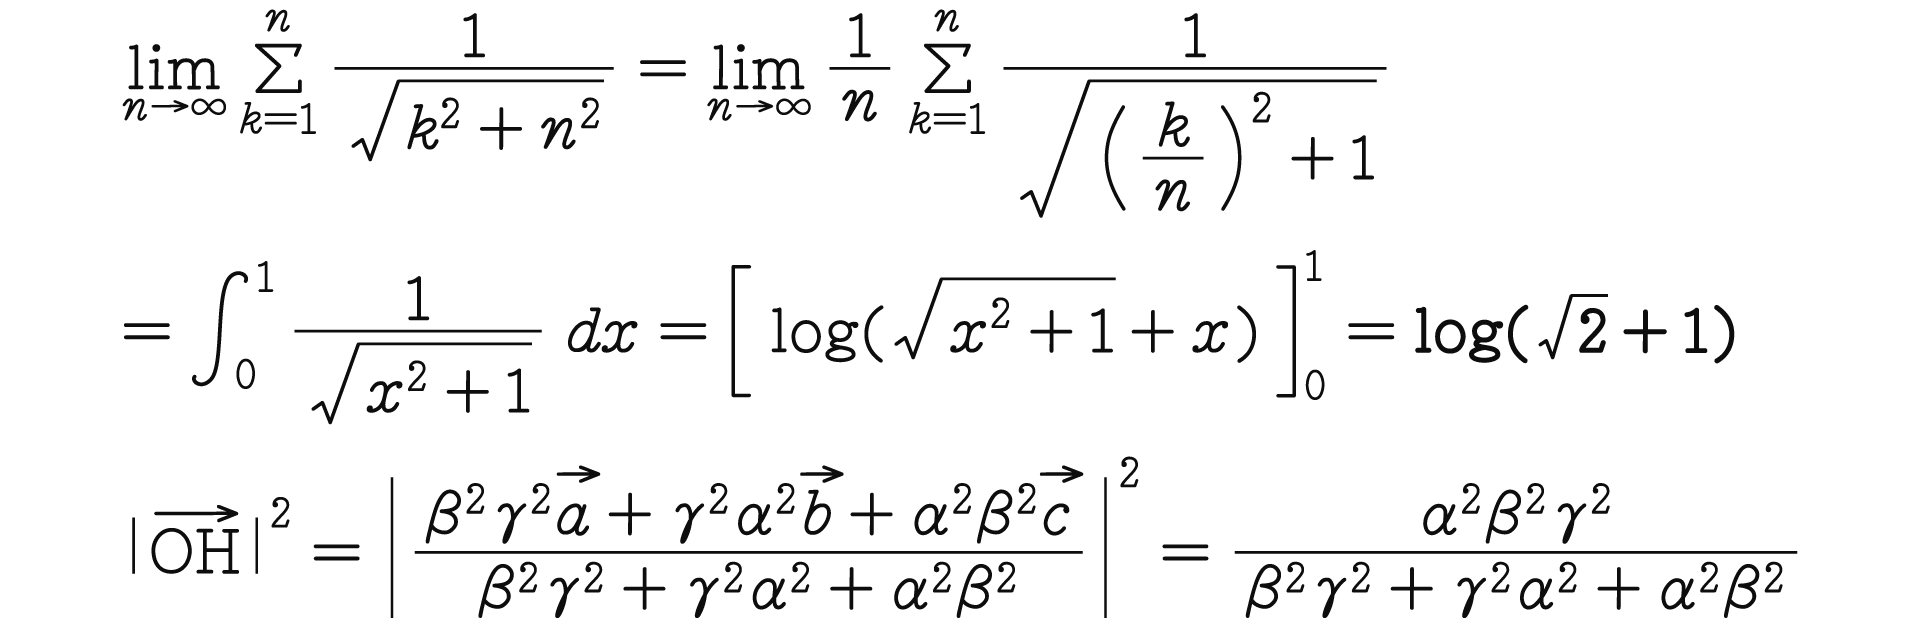 math-example.png